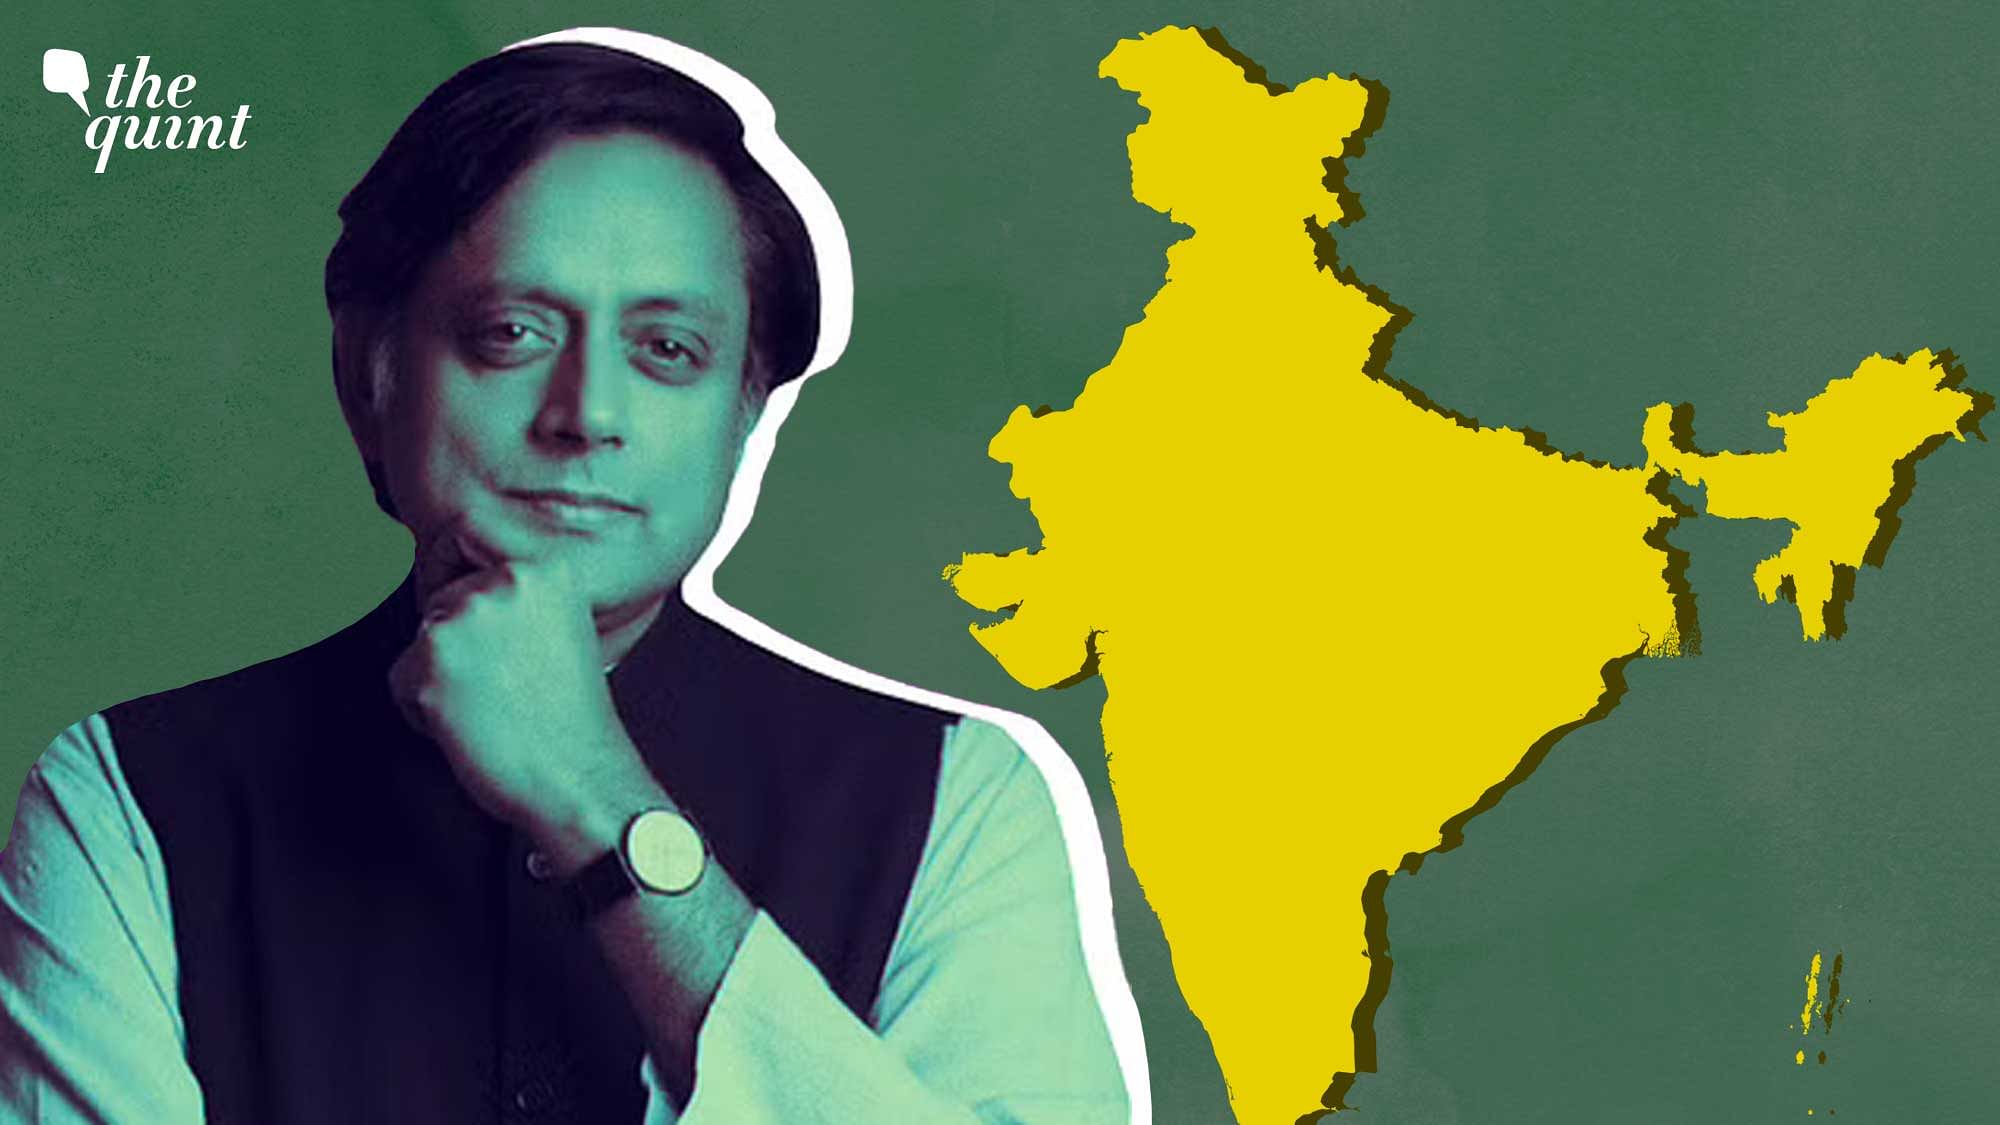 <div class="paragraphs"><p>Muslim-baiting rhetoric has become standard for the BJP in our country’s increasingly toxic politics, writes Shashi Tharoor.</p></div>